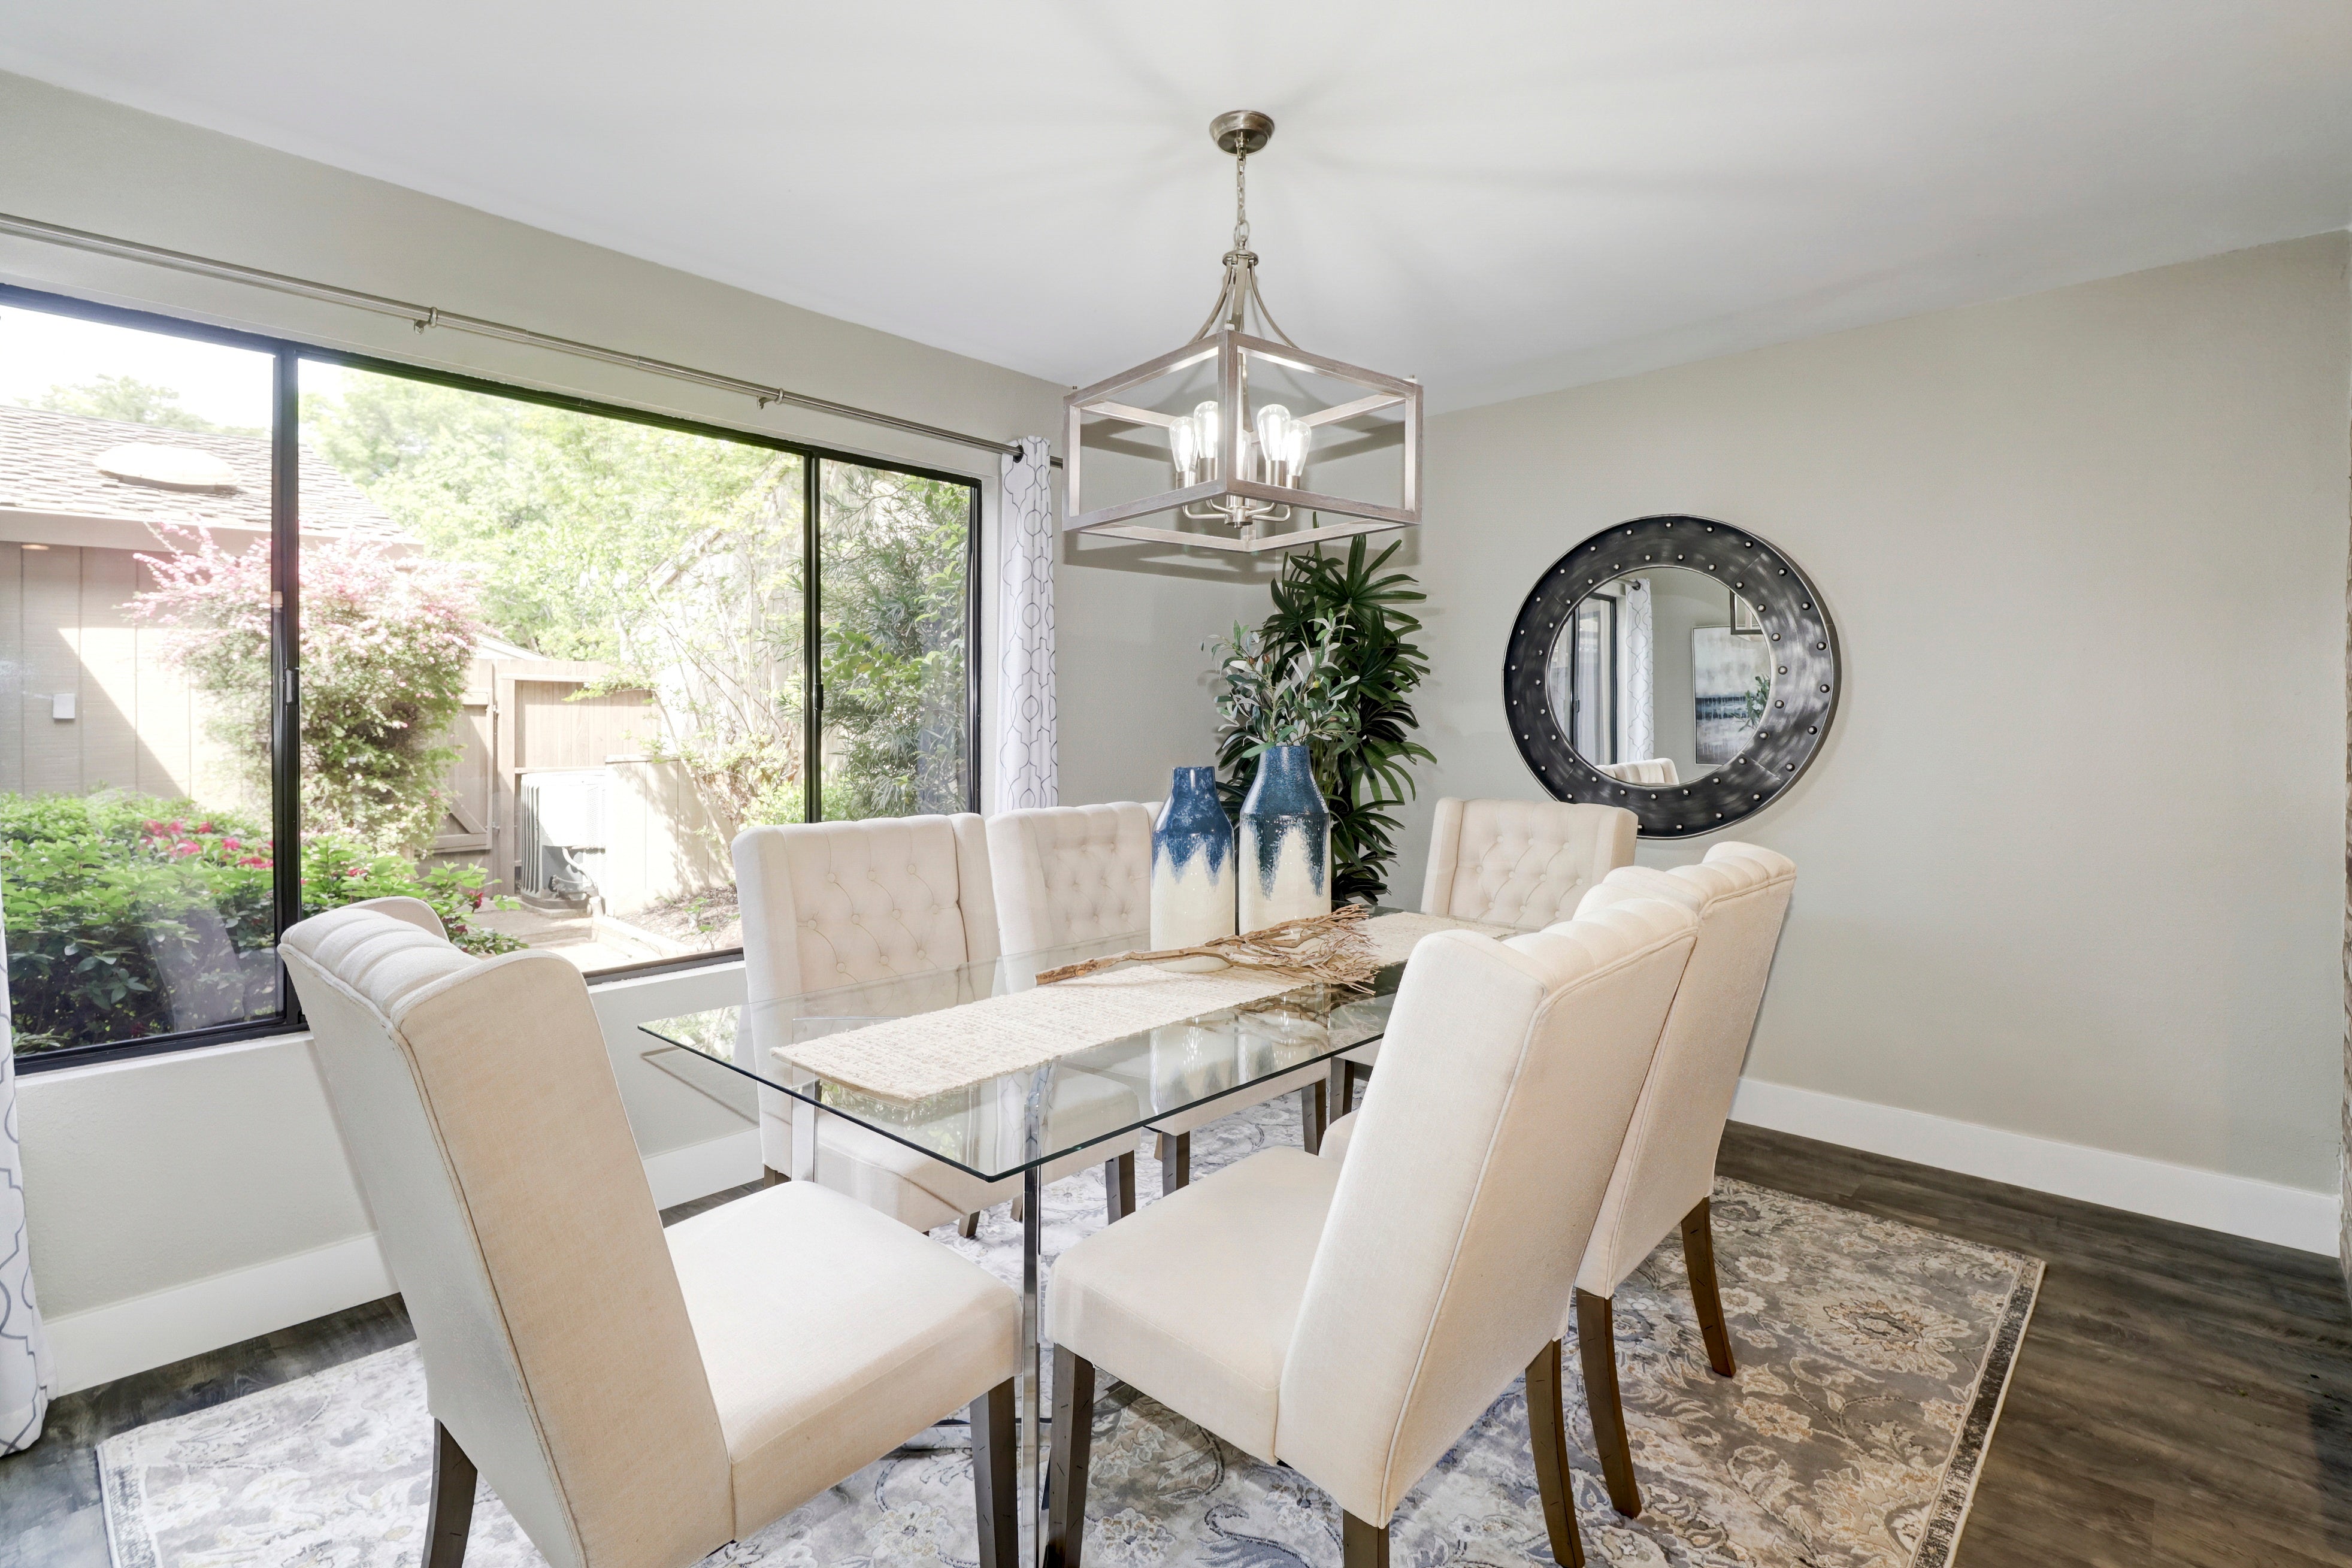 Premiere Home Staging Projects | Dining area interior design idea - Swarthmore Dr, Sacramento